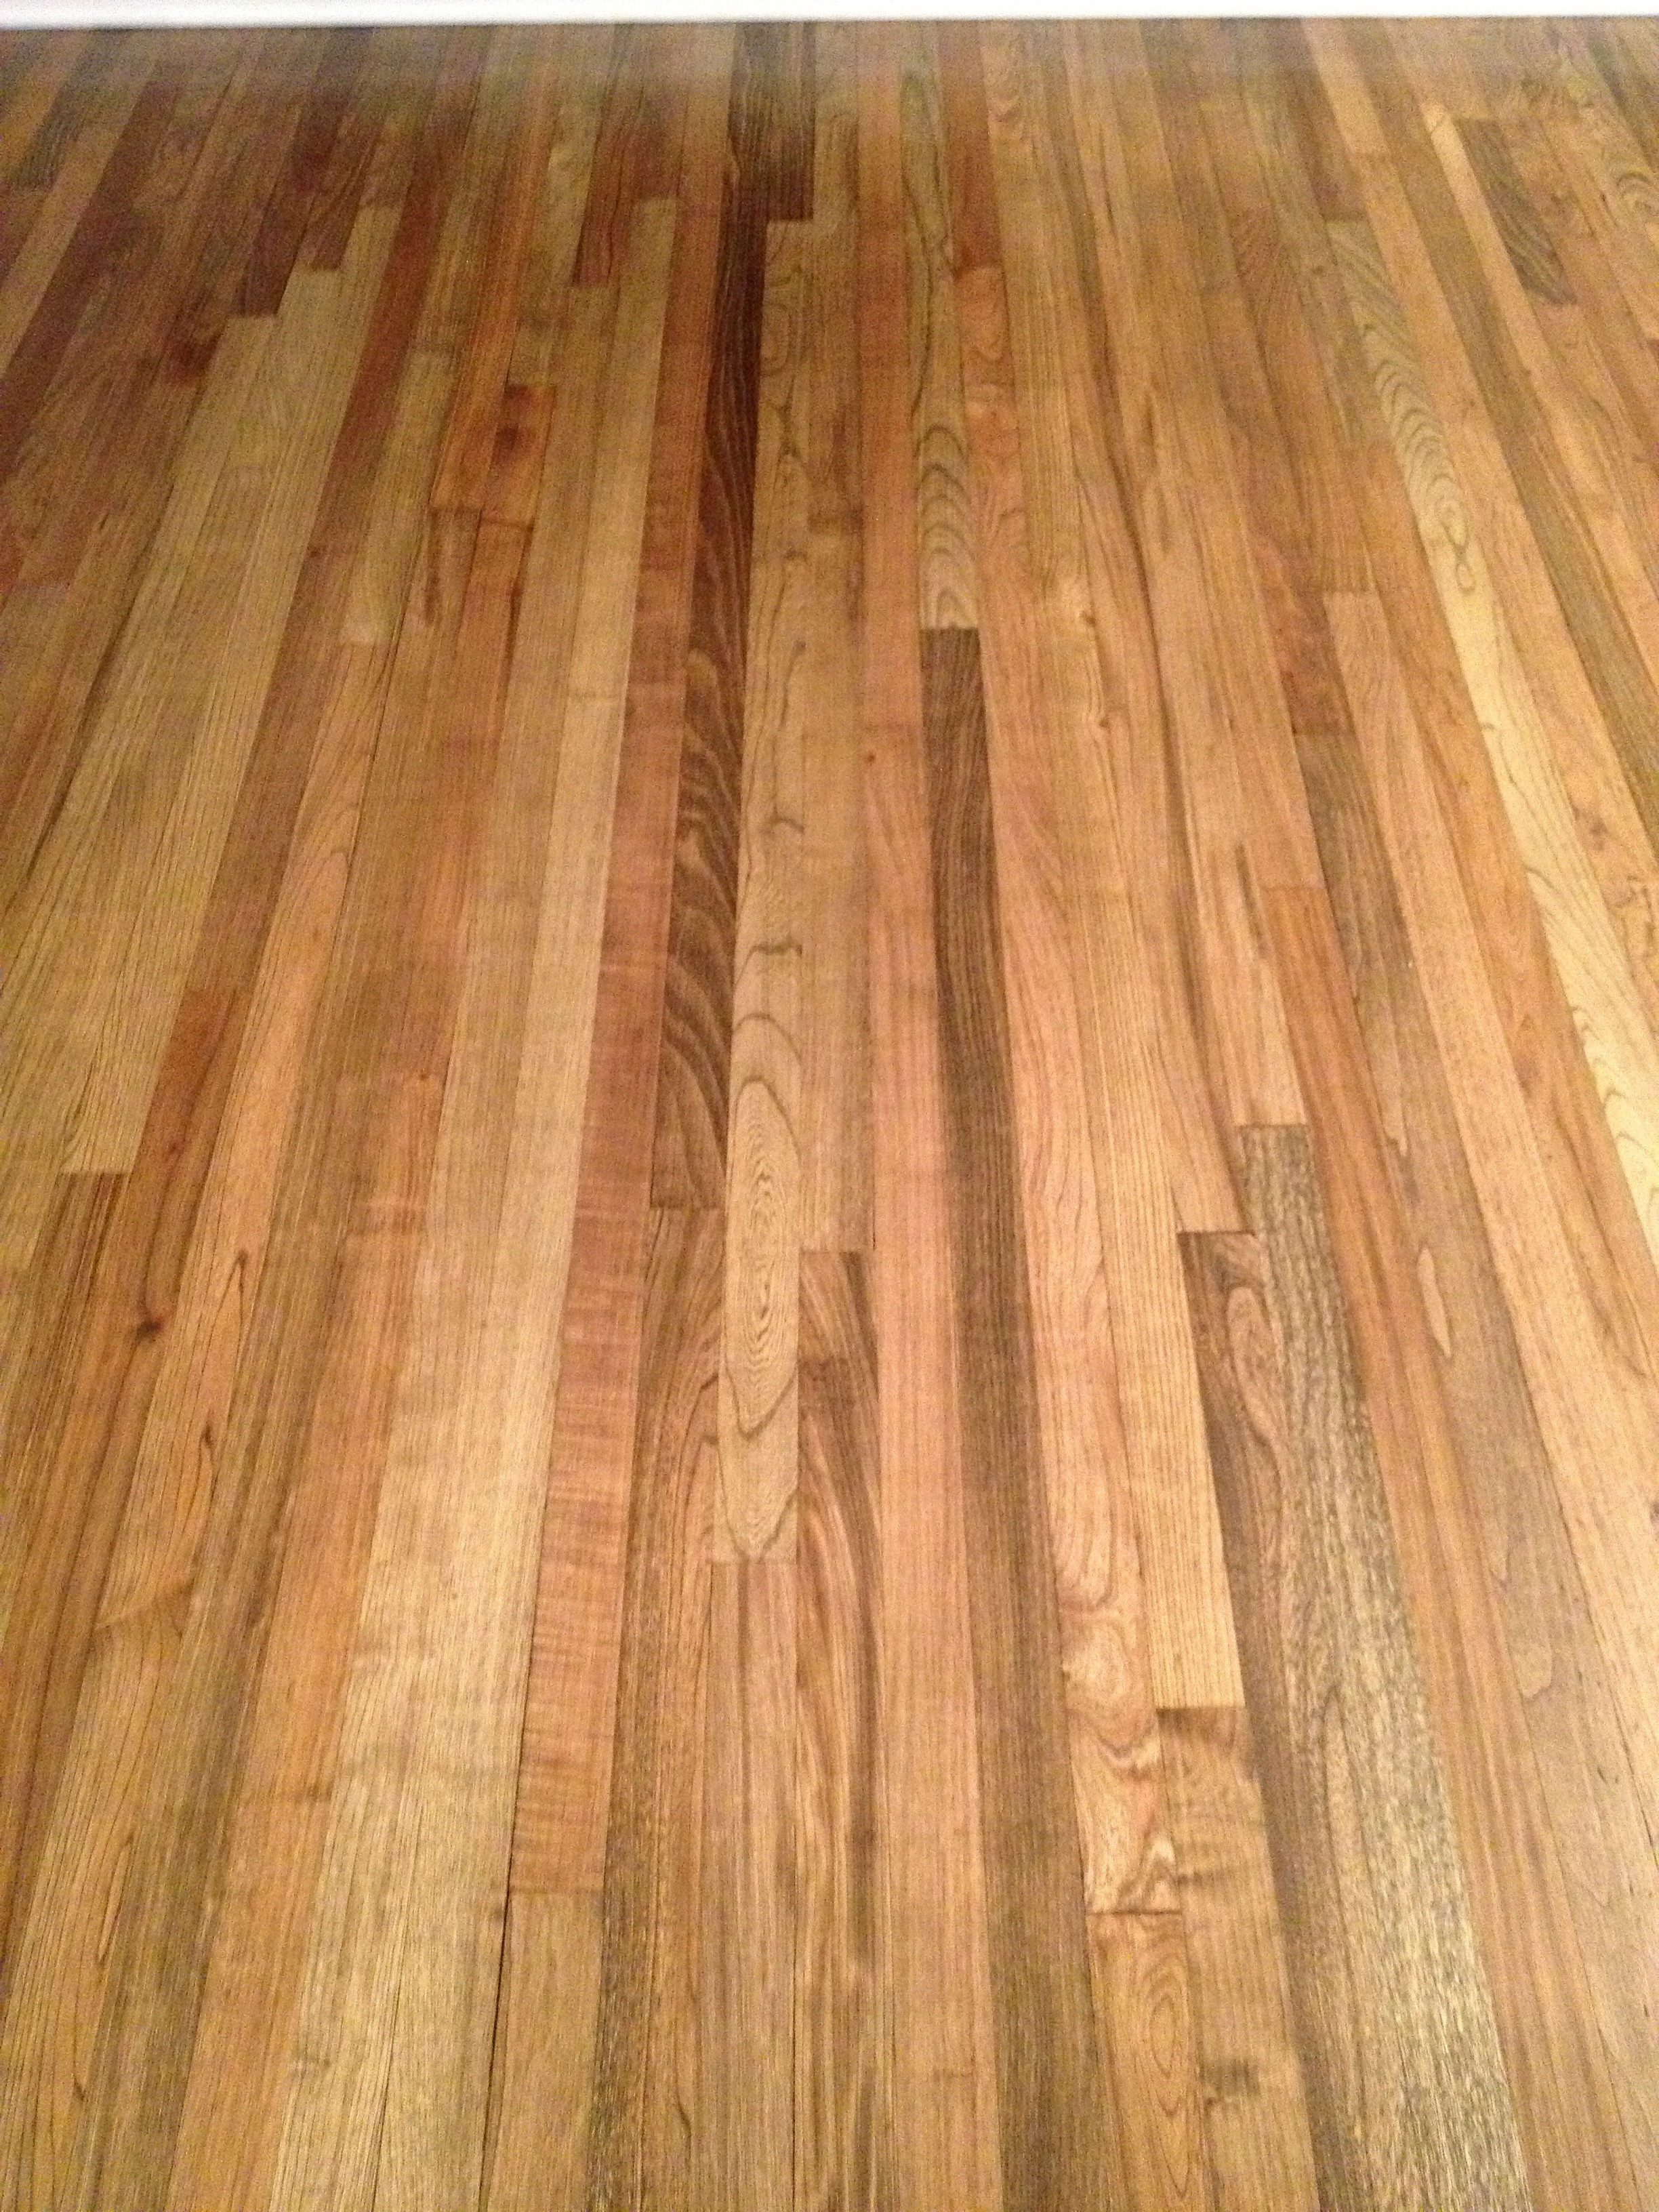 13 attractive Hardwood Floor Refinishing south Jersey 2024 free download hardwood floor refinishing south jersey of flooring portfolio gorsegner brothers with img 0197